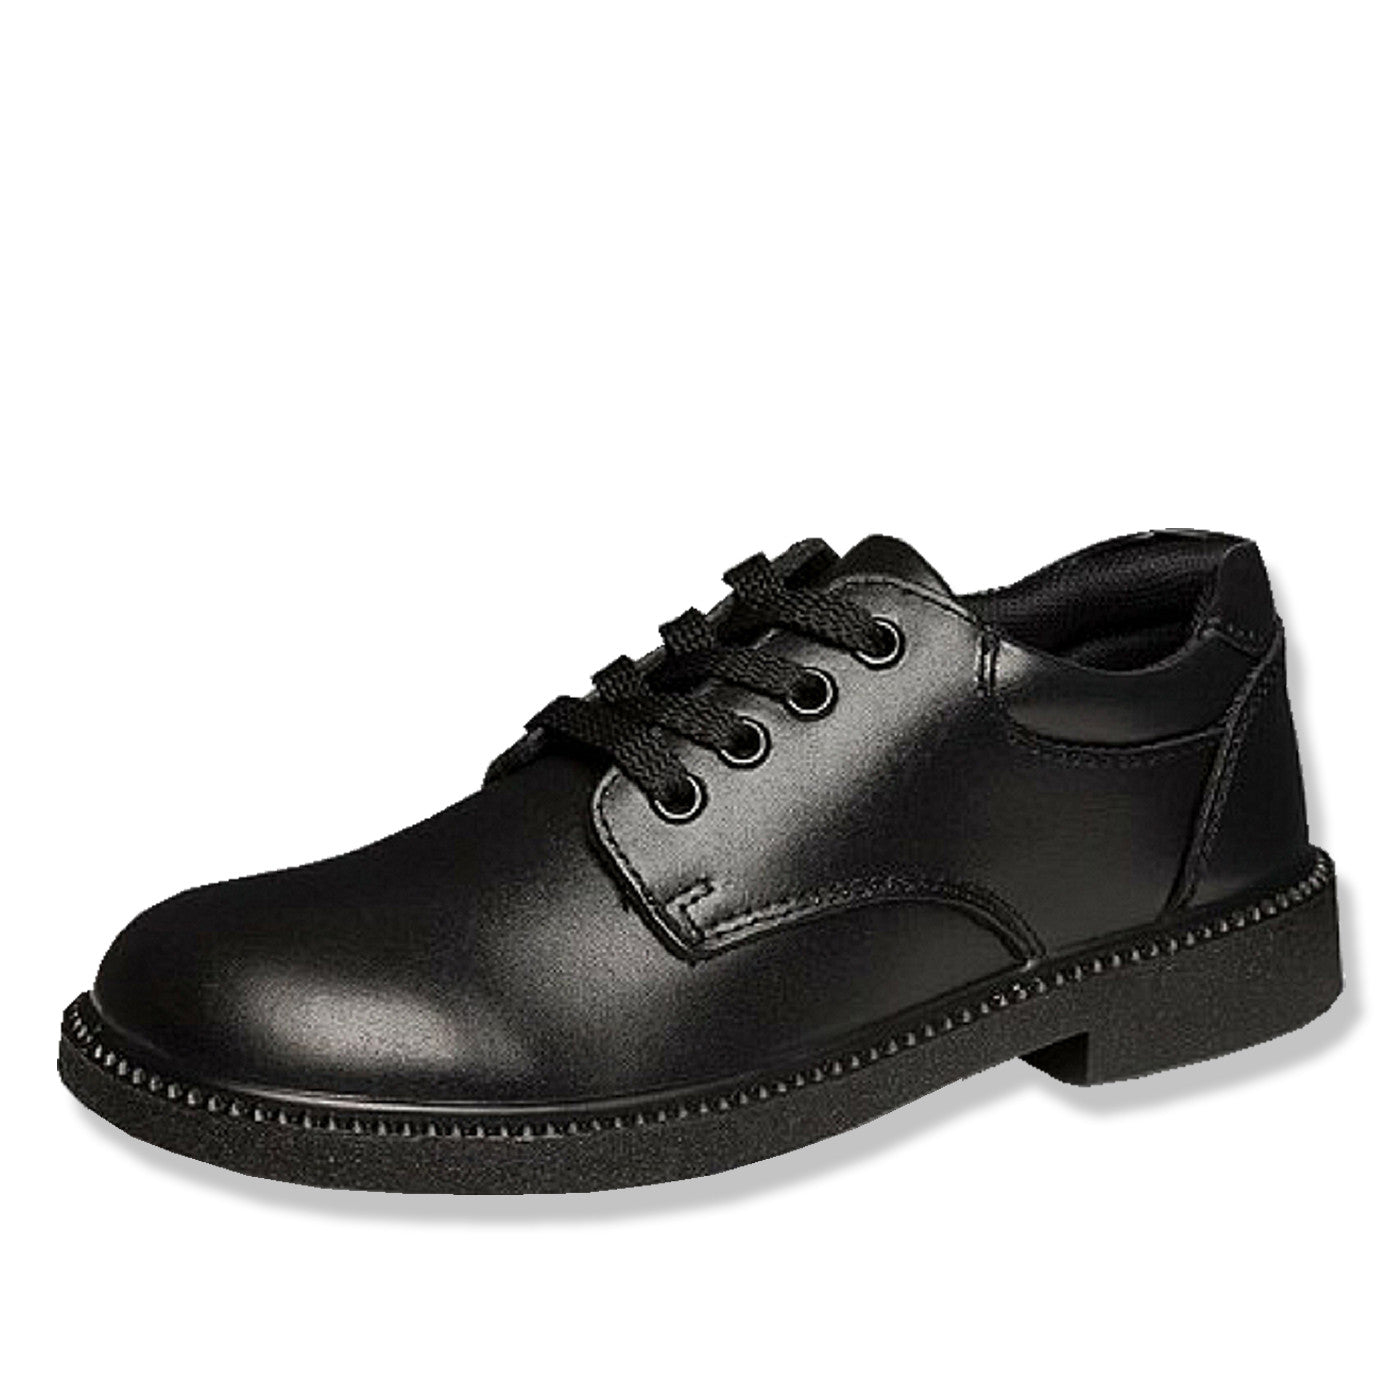 clarks school shoes clearance